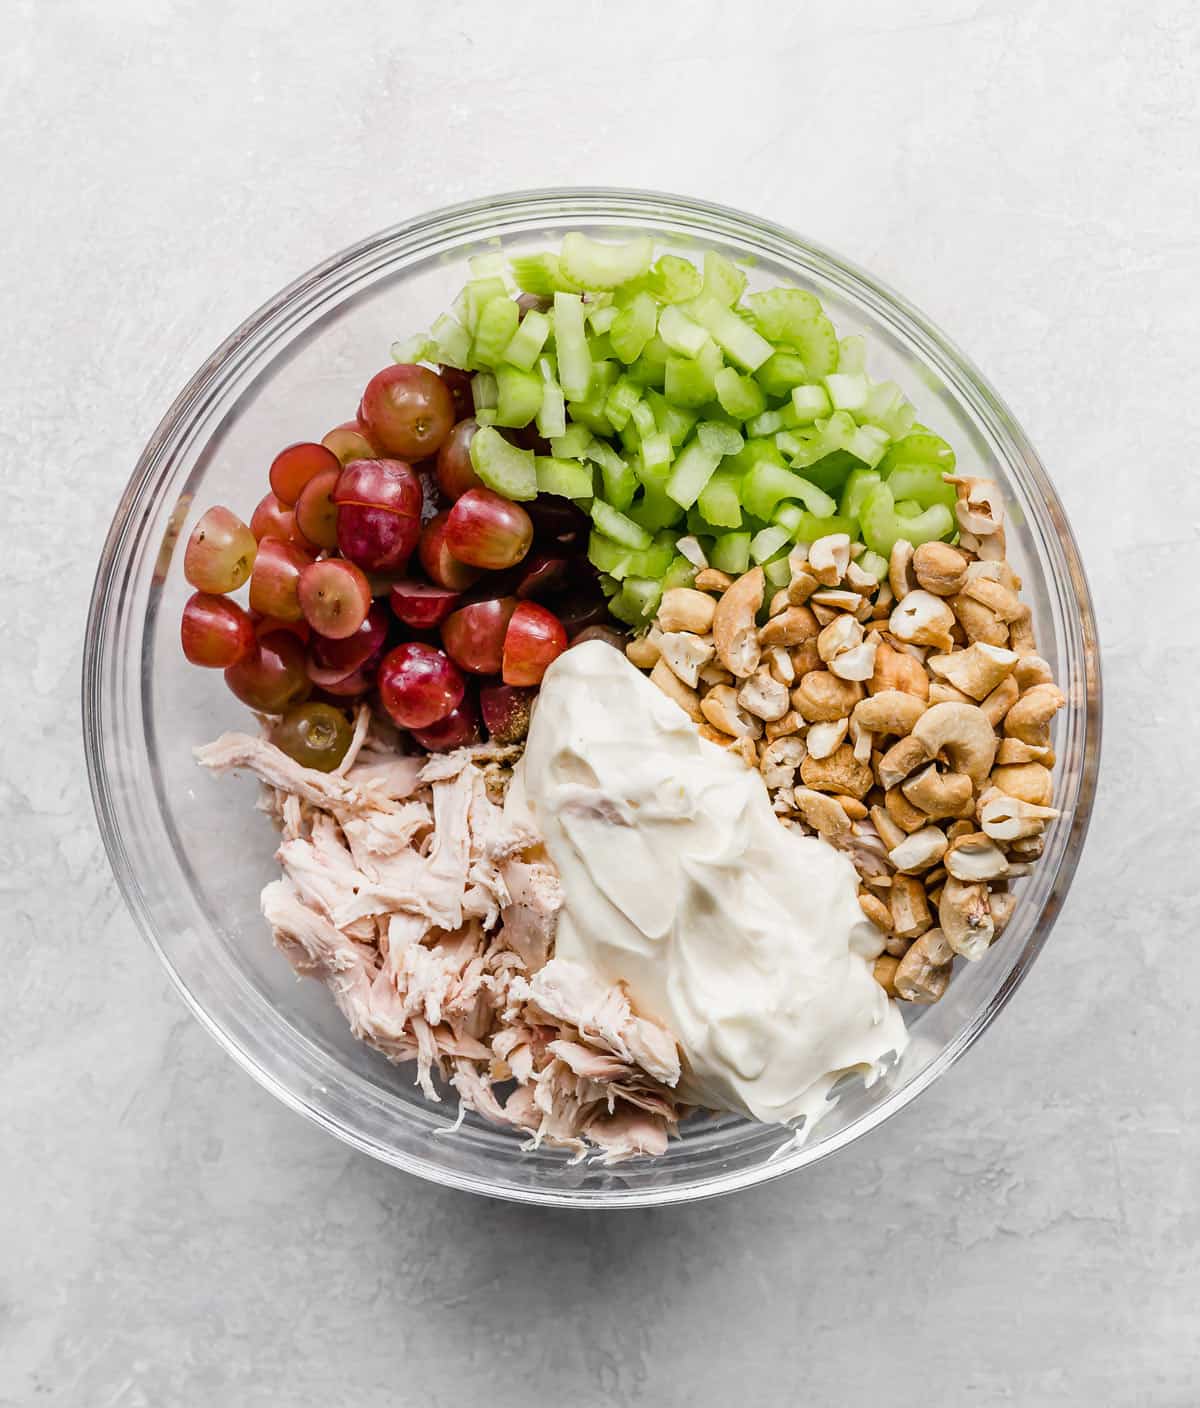 A glass bowl with shredded chicken, purple grapes, celery, cashews, and mayo in it.